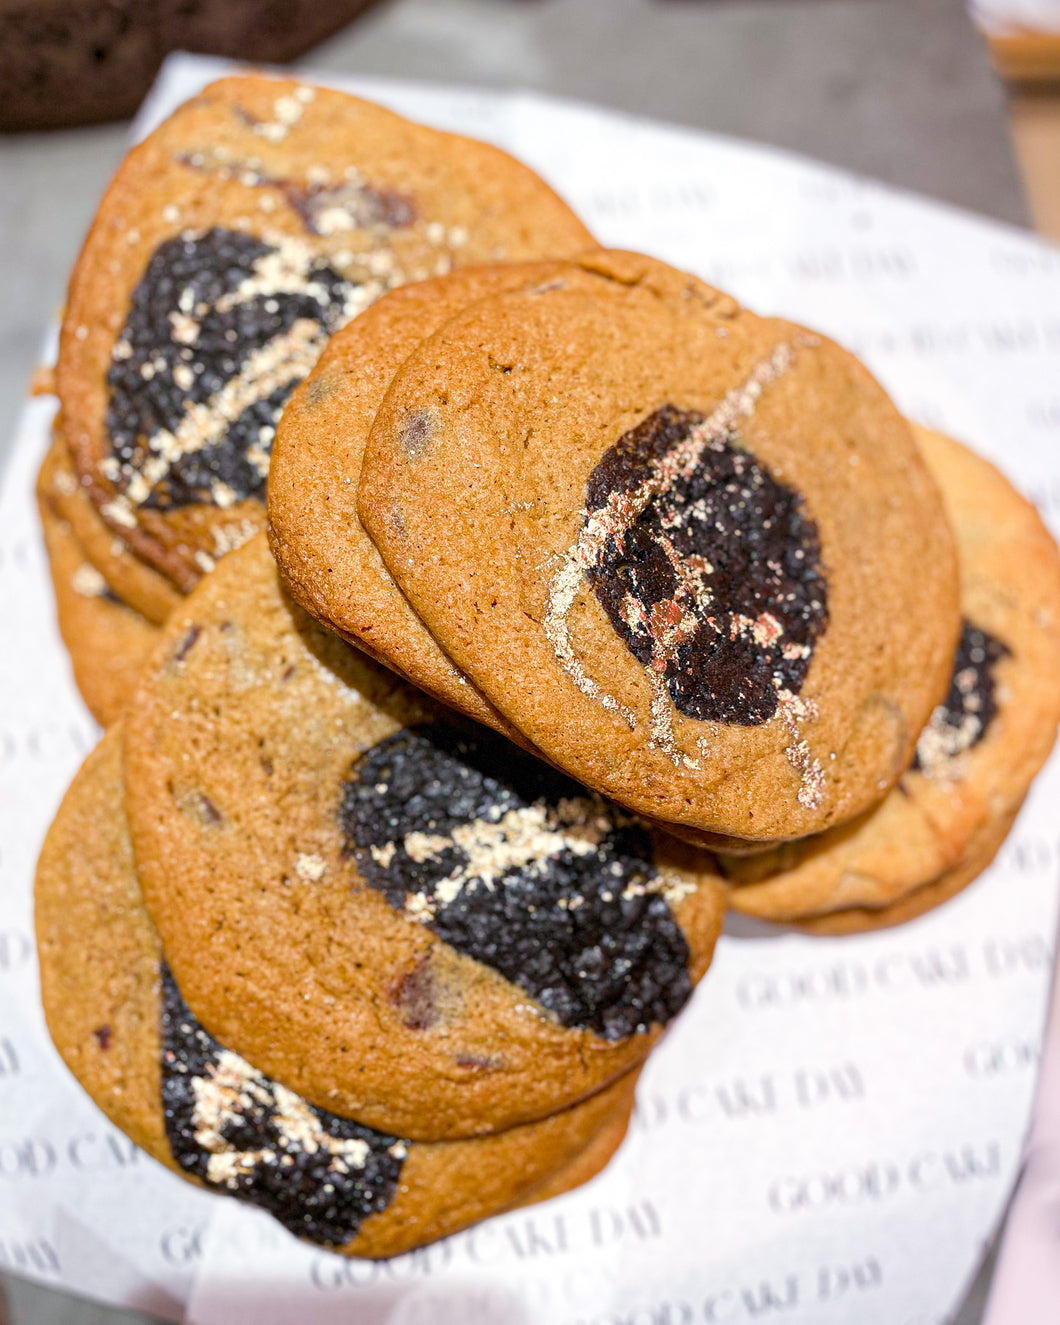 Crownie - Chocolate Chip Cookie with a Dark Chocolate Brownie Centre